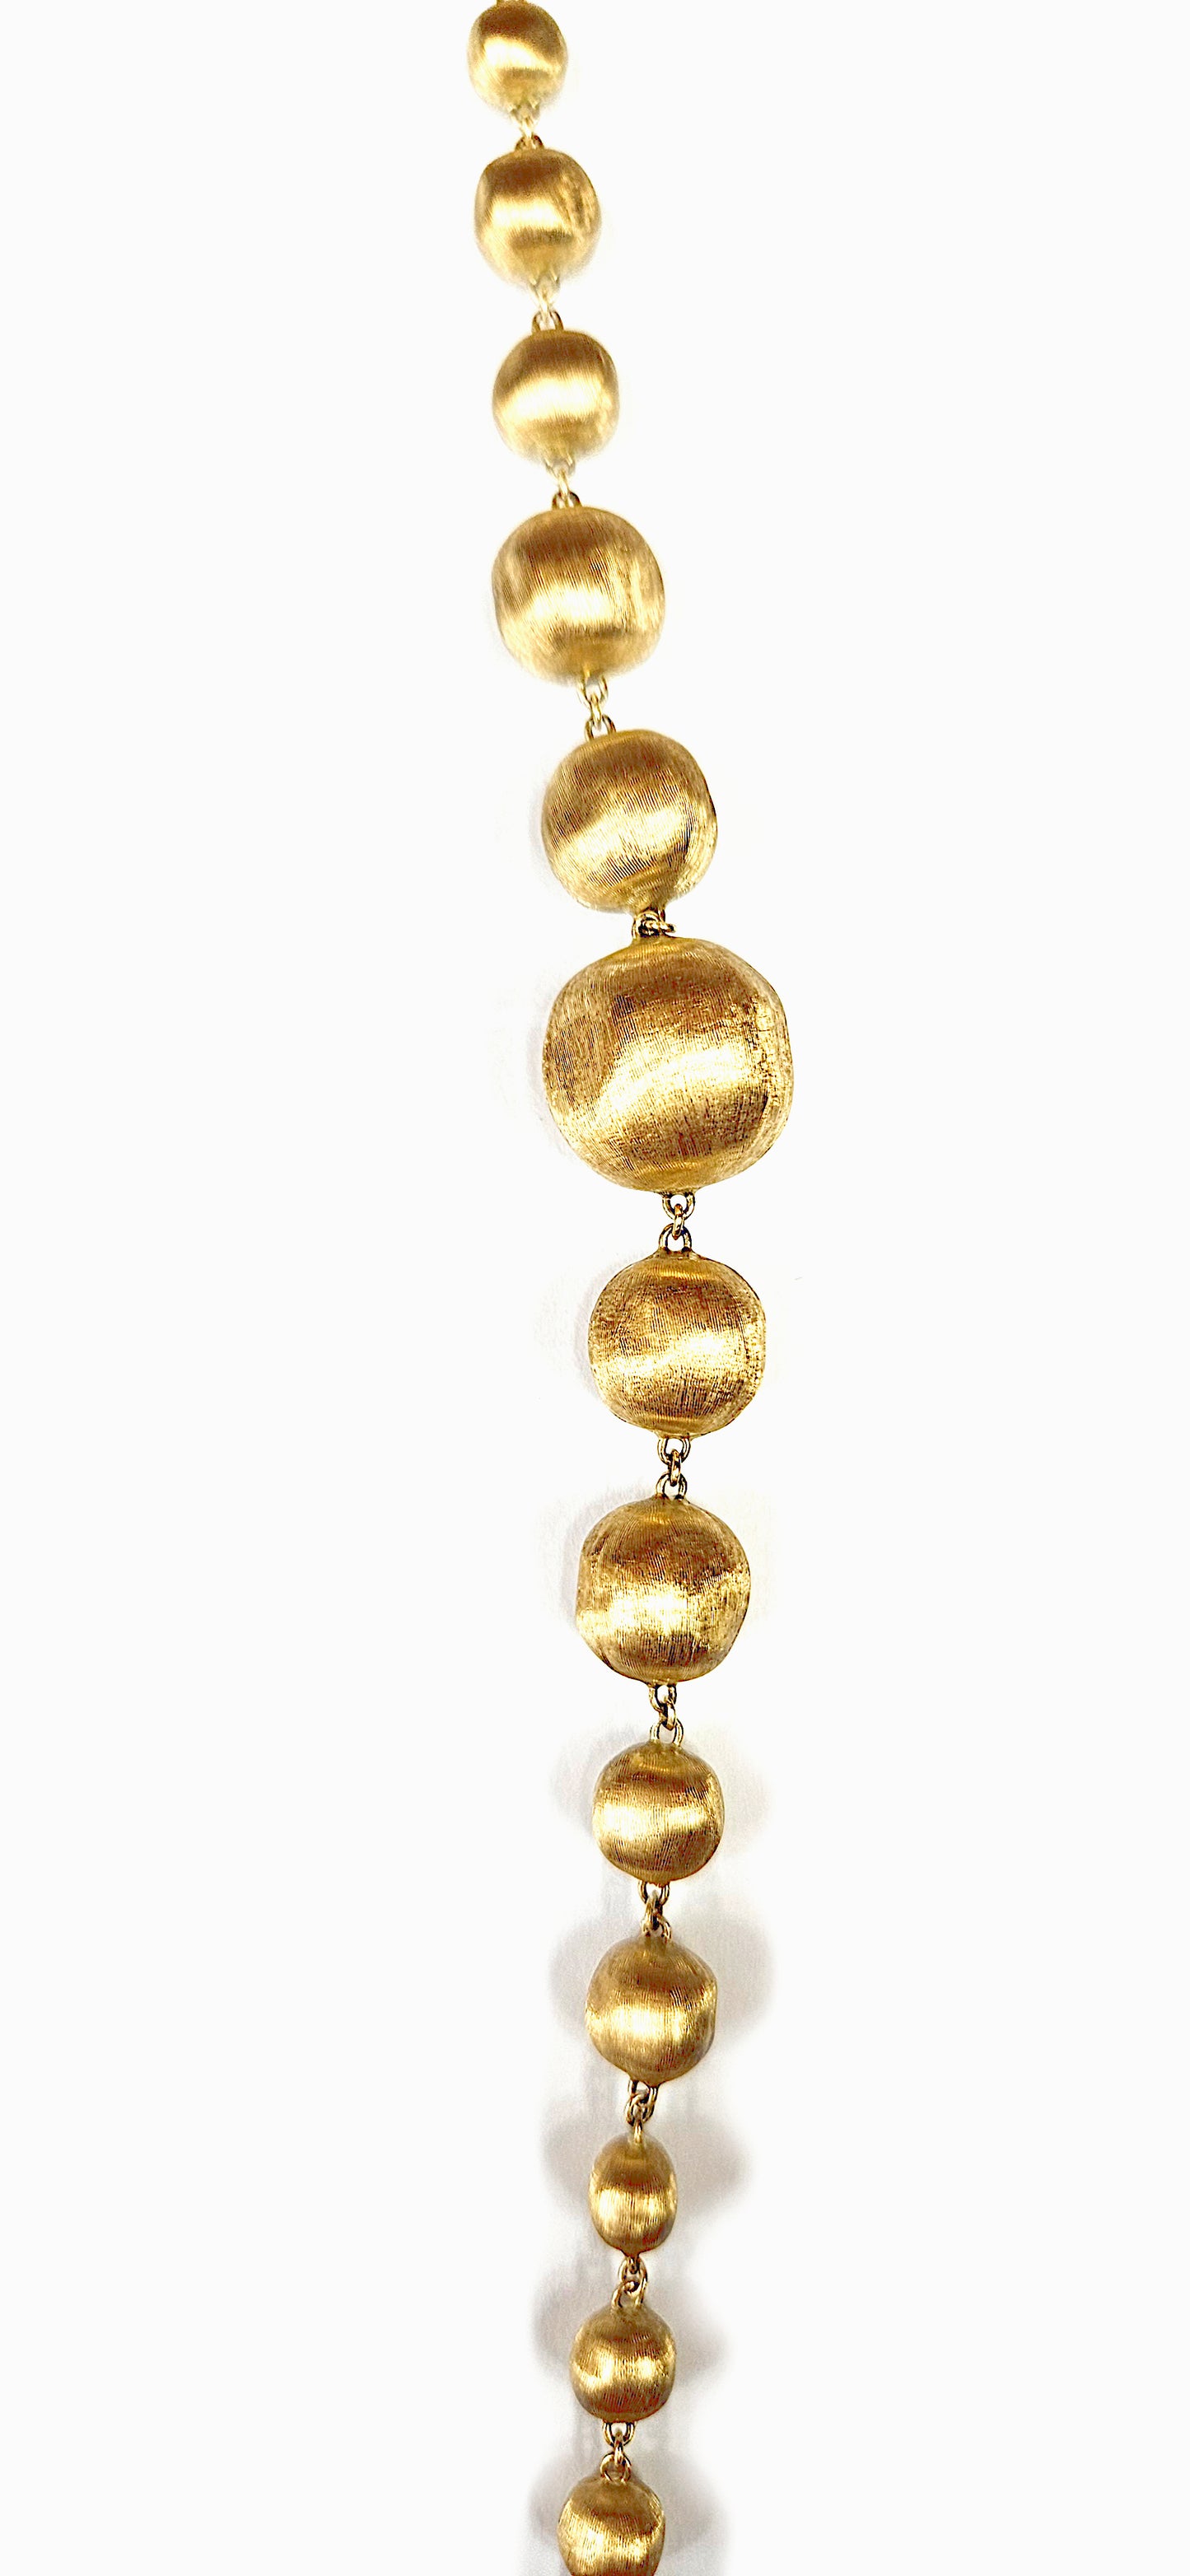 Marco Bicego Yellow Gold 'Africa' Necklace